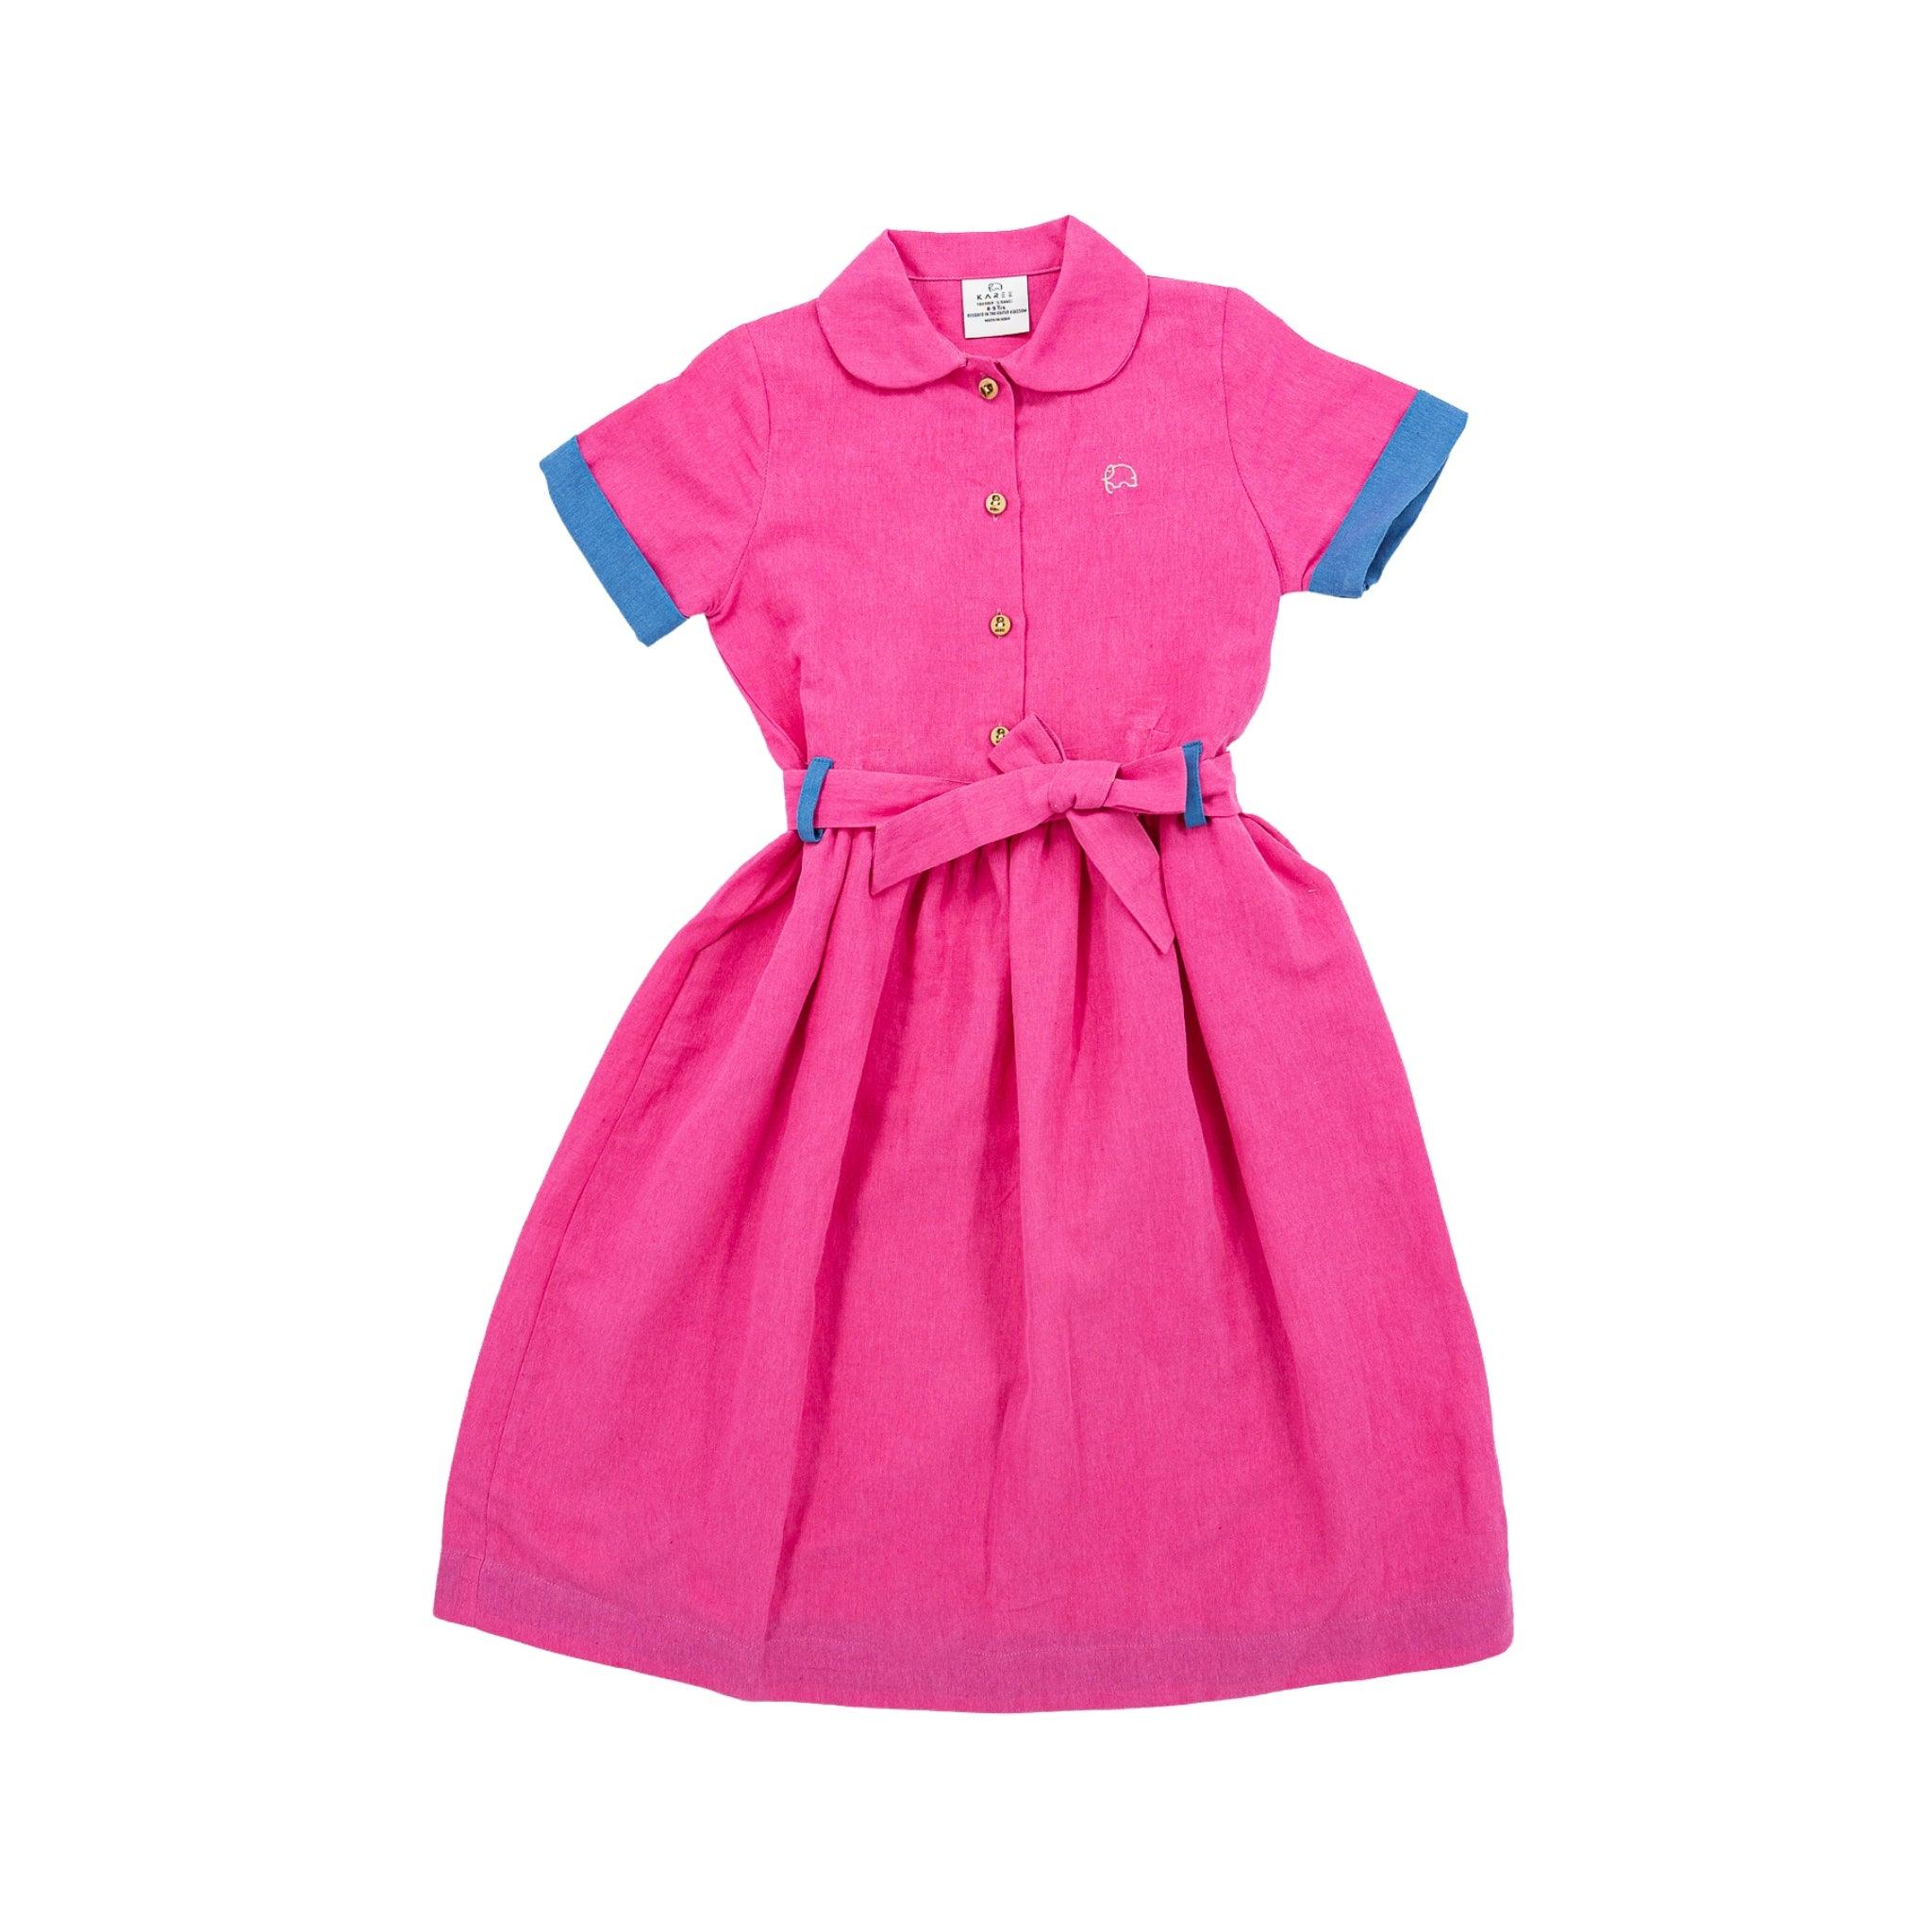 Fuchsia Purple Linen Dress for Girls by Karee, with short sleeves, blue trim, and a waist tie, displayed against a white background.